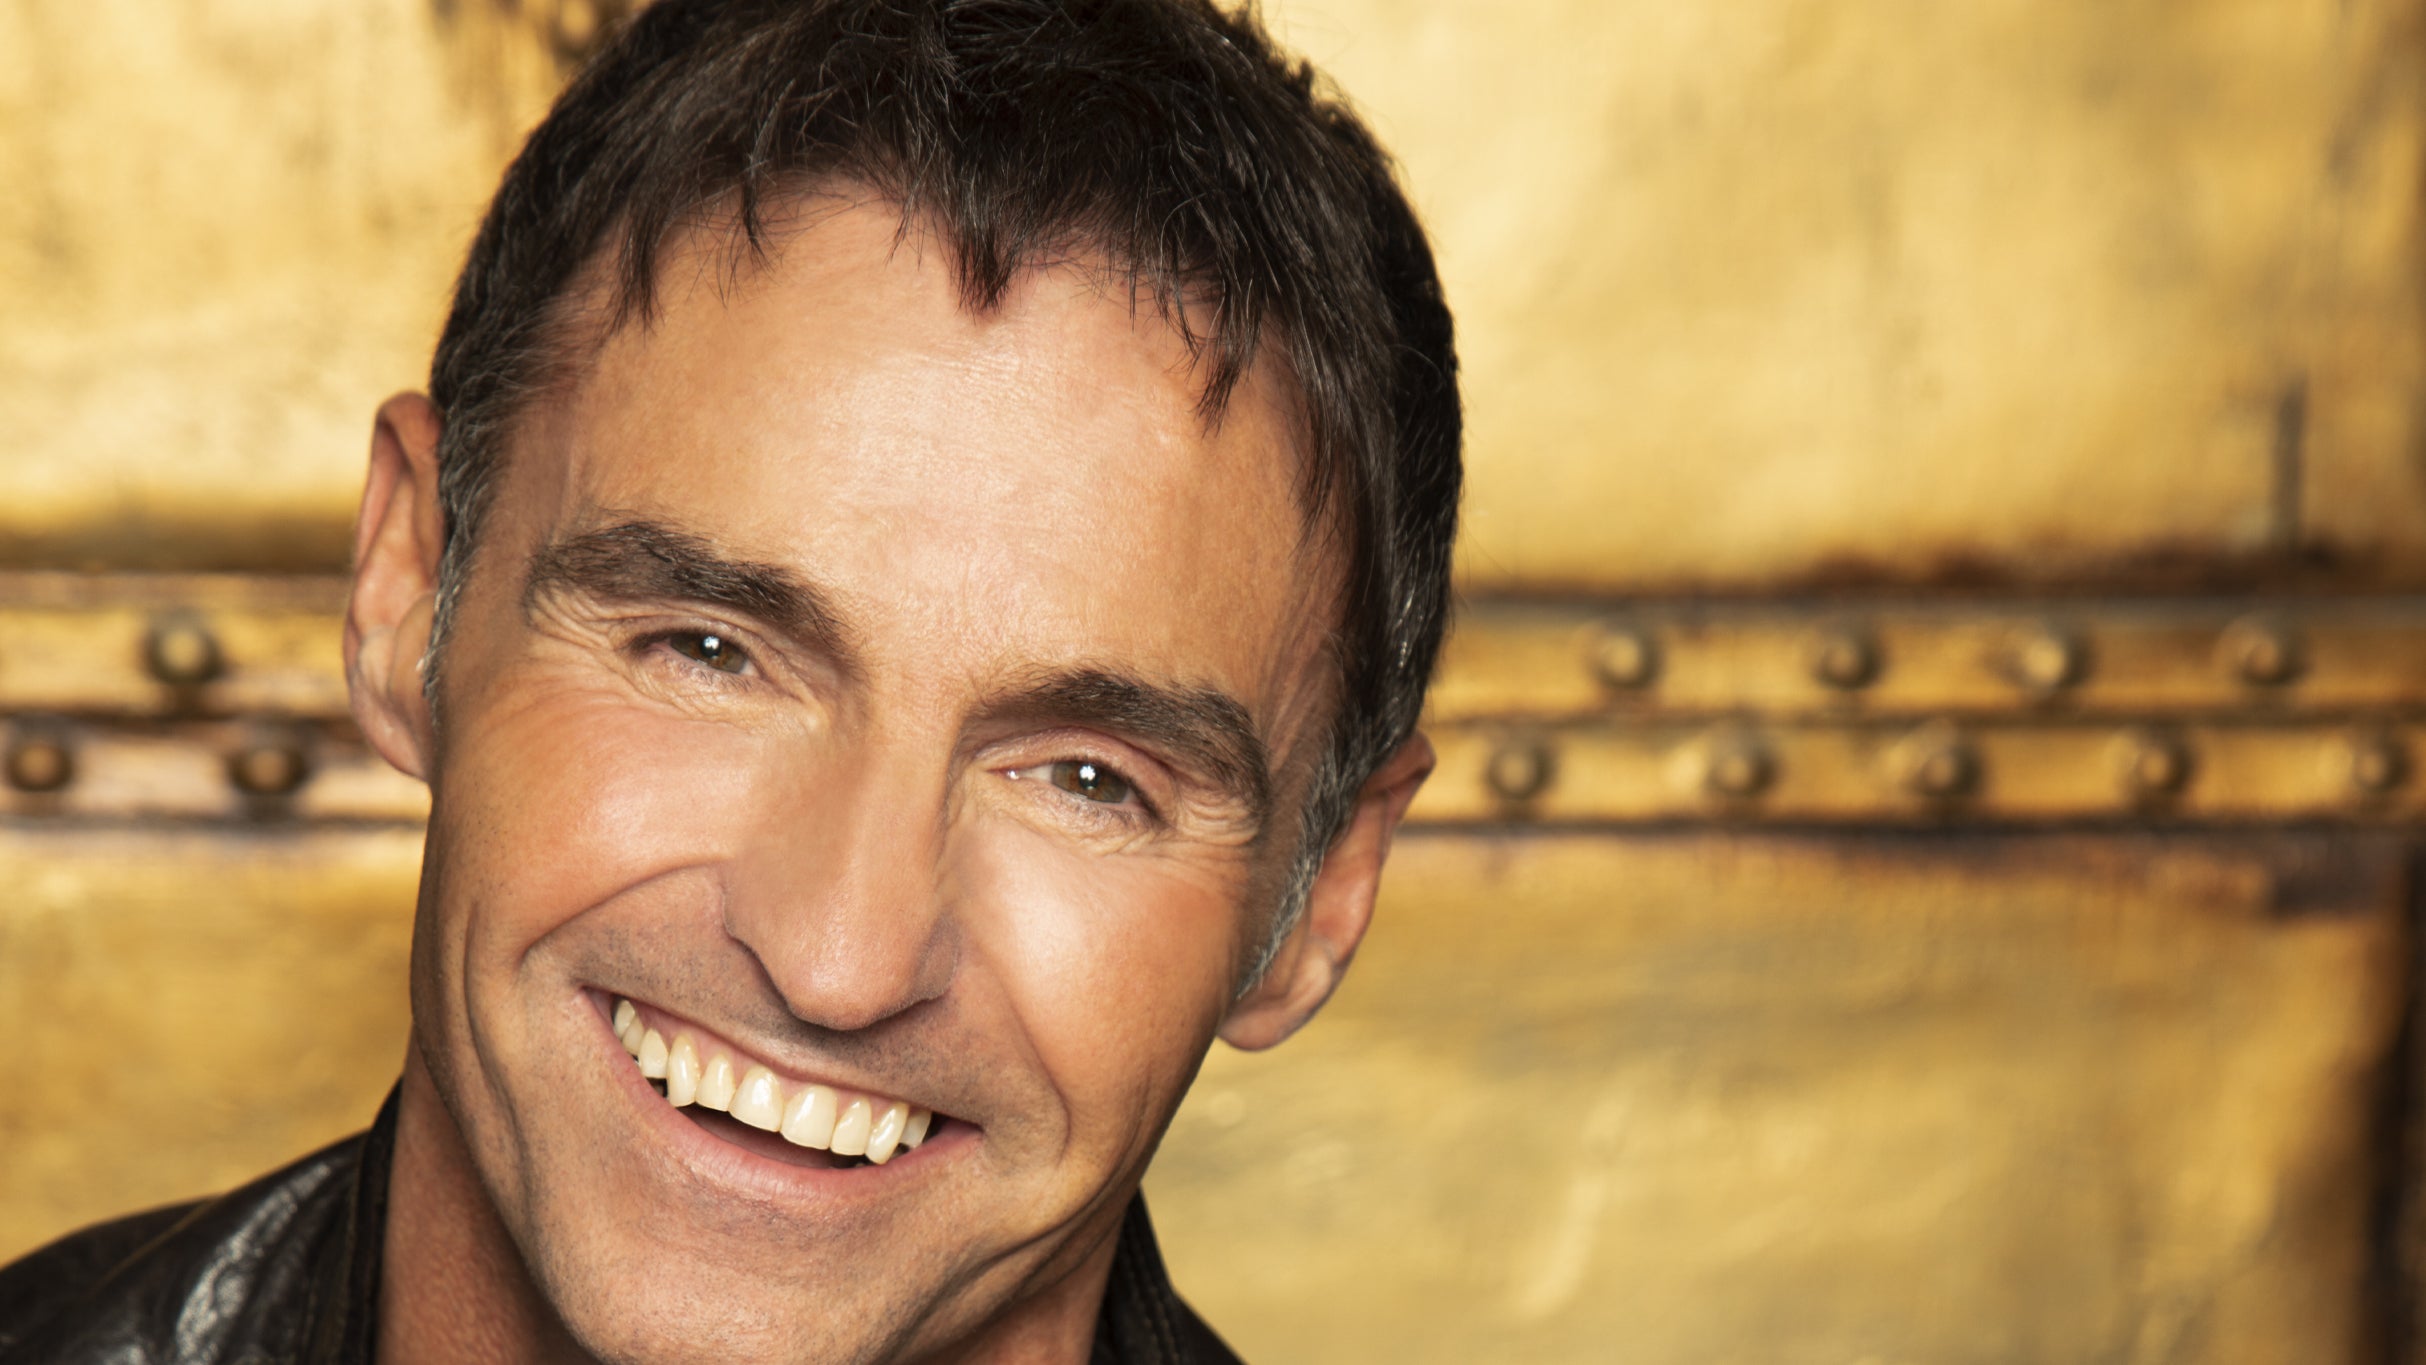 Marti Pellow Presents Popped In Souled Out in Dublin promo photo for Artist presale offer code